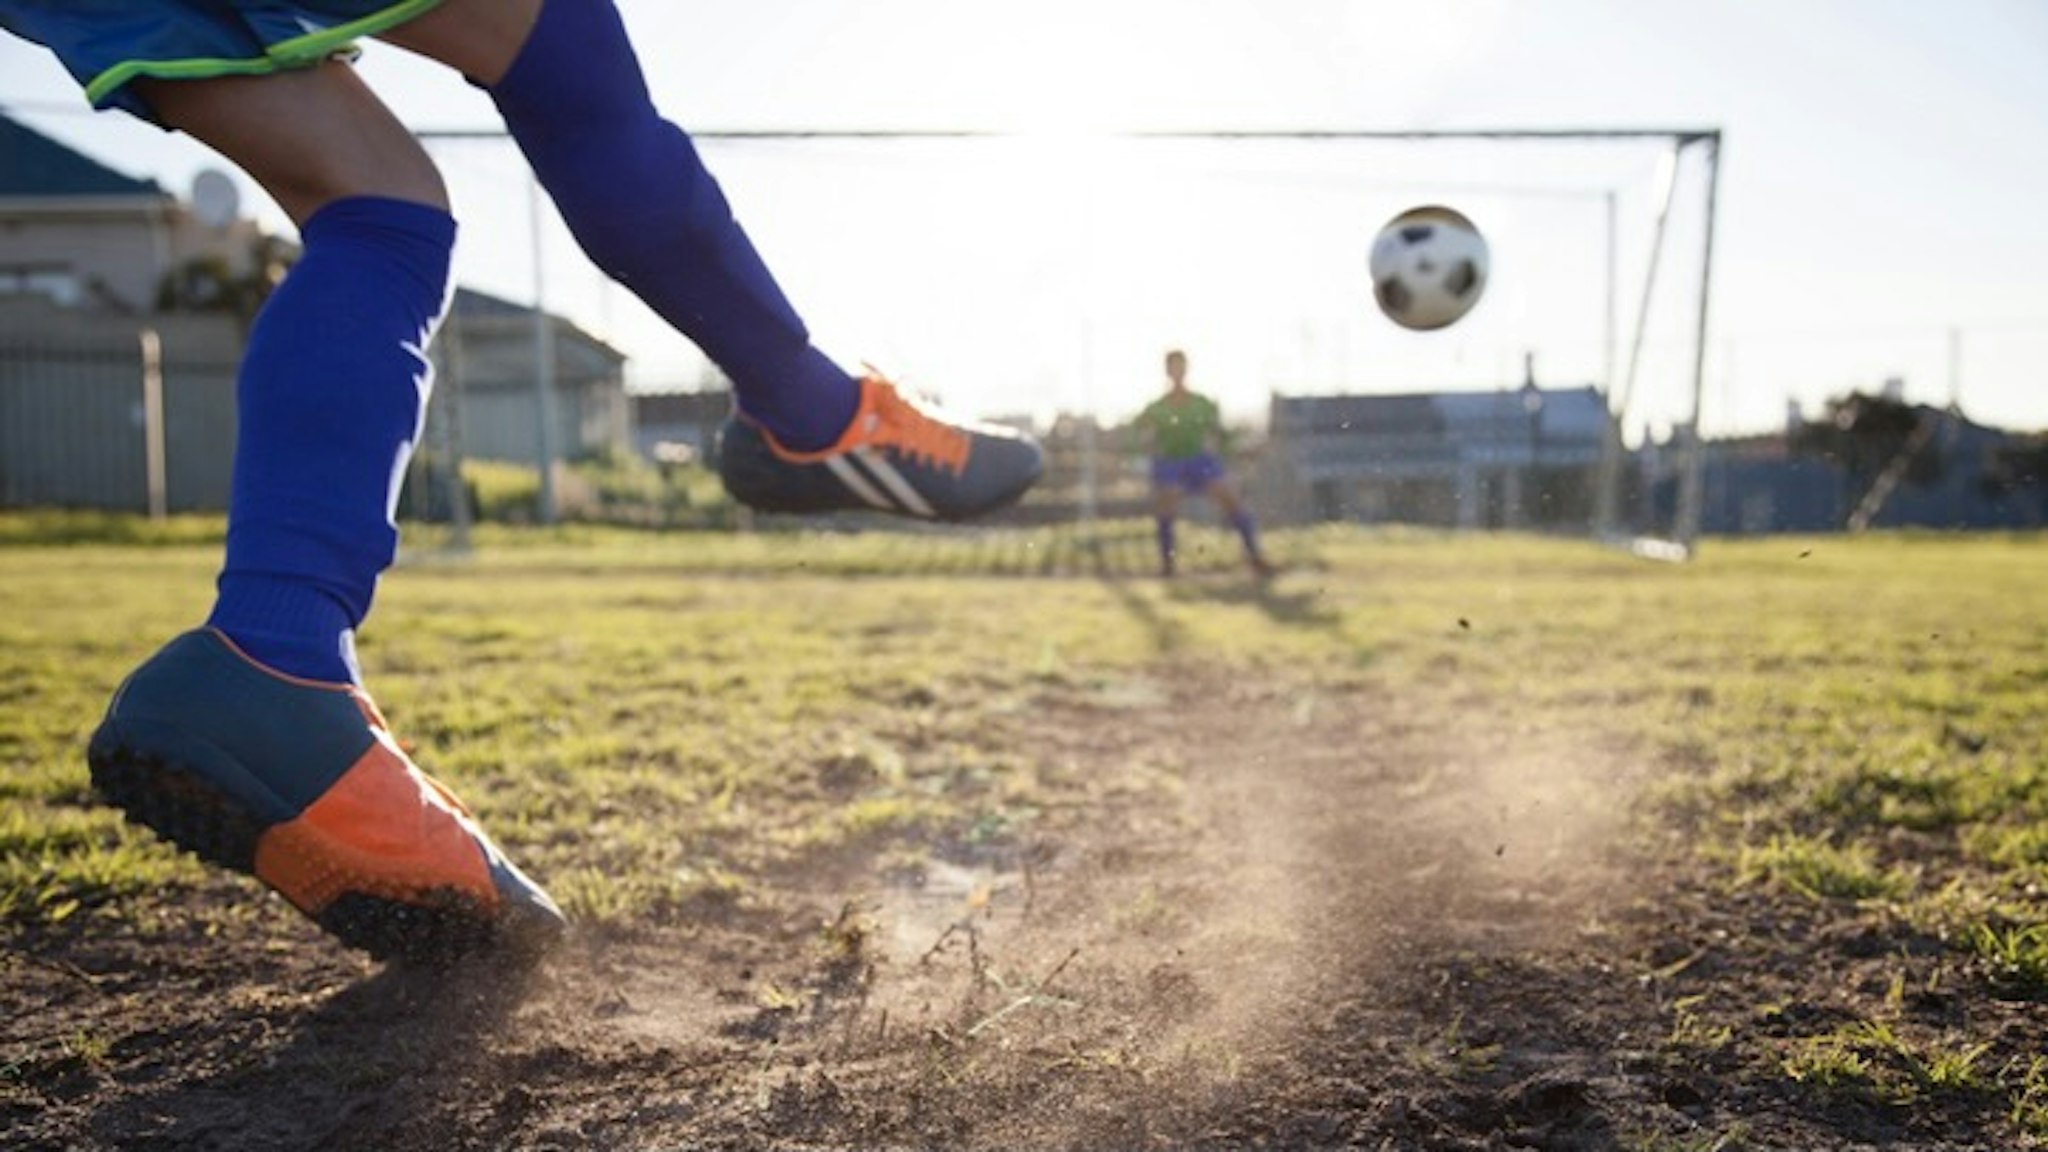 Close up of boy taking soccer penalty - stock photo Close up action of boy, aged 14, taking a penalty kick in a football match Alistair Berg via Getty Images